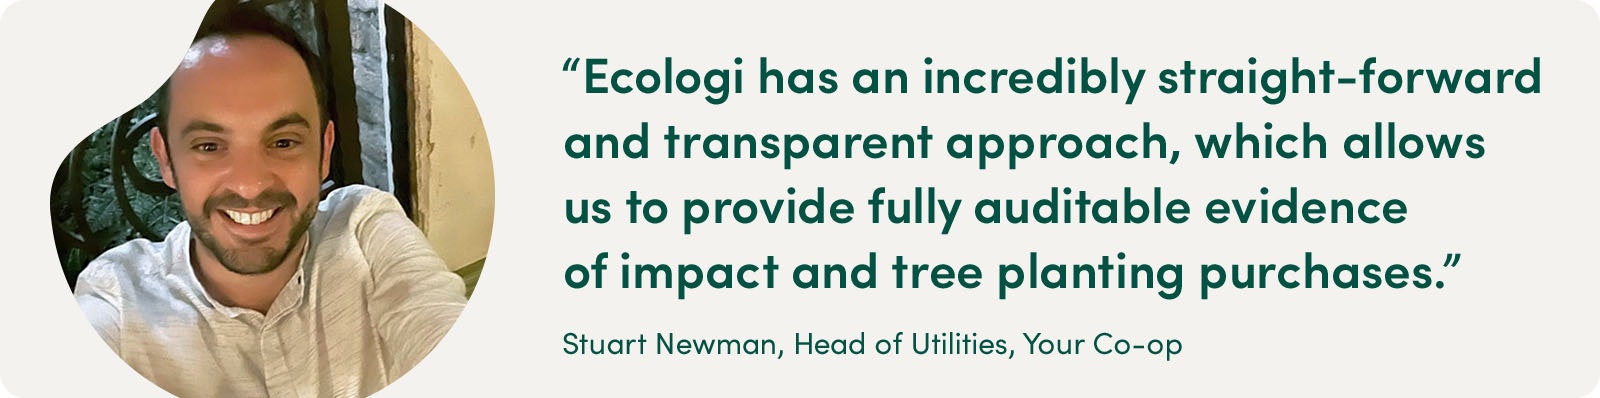 "Ecologi has an incredibly straight-forward and transparent approach, which allows us to provide fully auditable evidence of impact and tree planting purchases." - Stuart Newman, Head of Utilities, Your Co-op